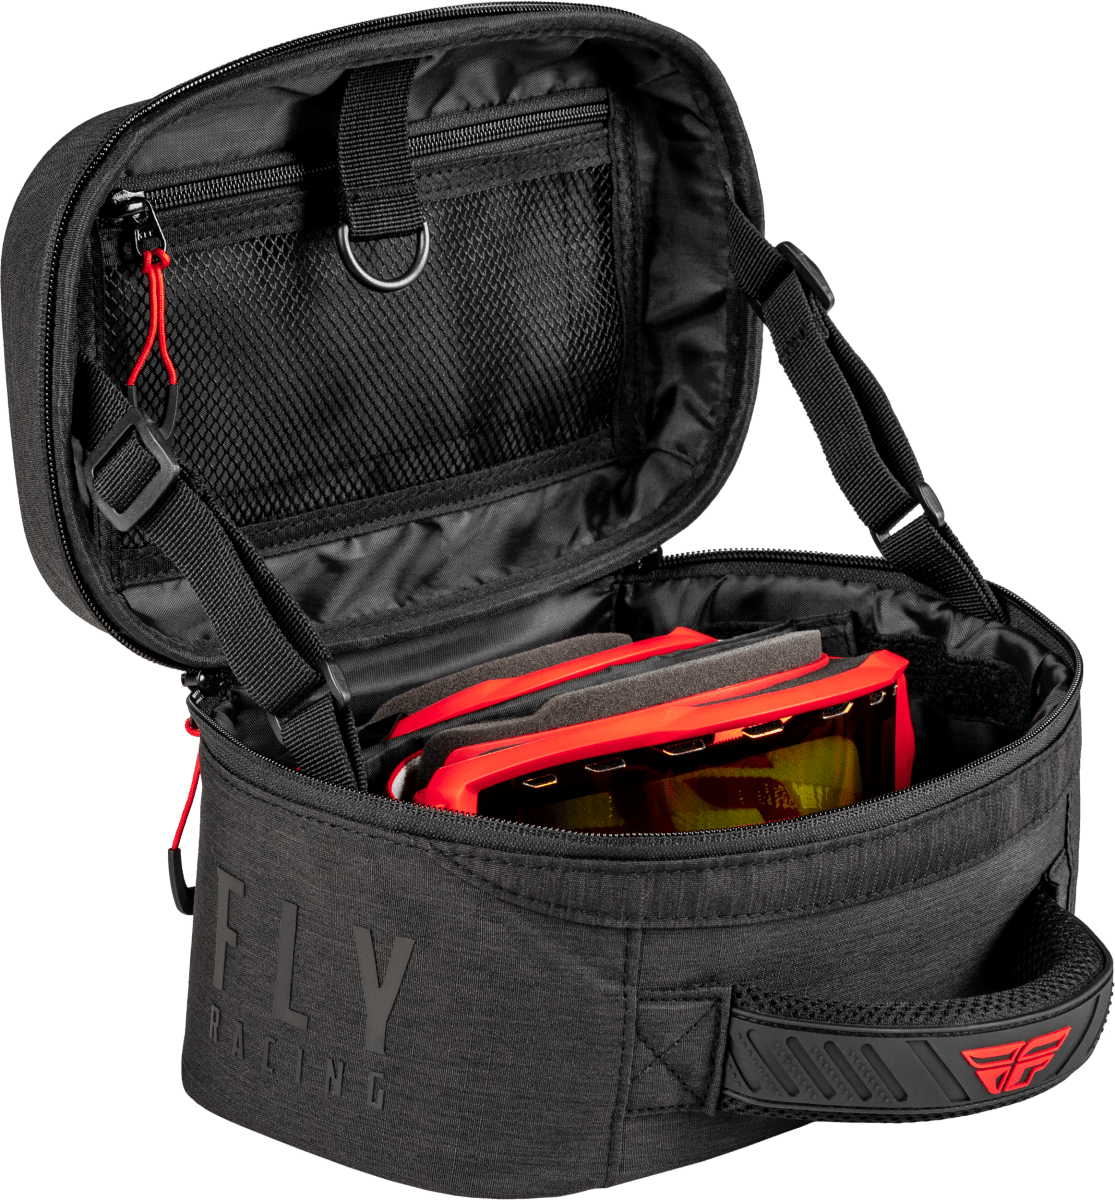 FLY RACING - DUAL GOGGLES CASE - 28-5240 - 191361413124